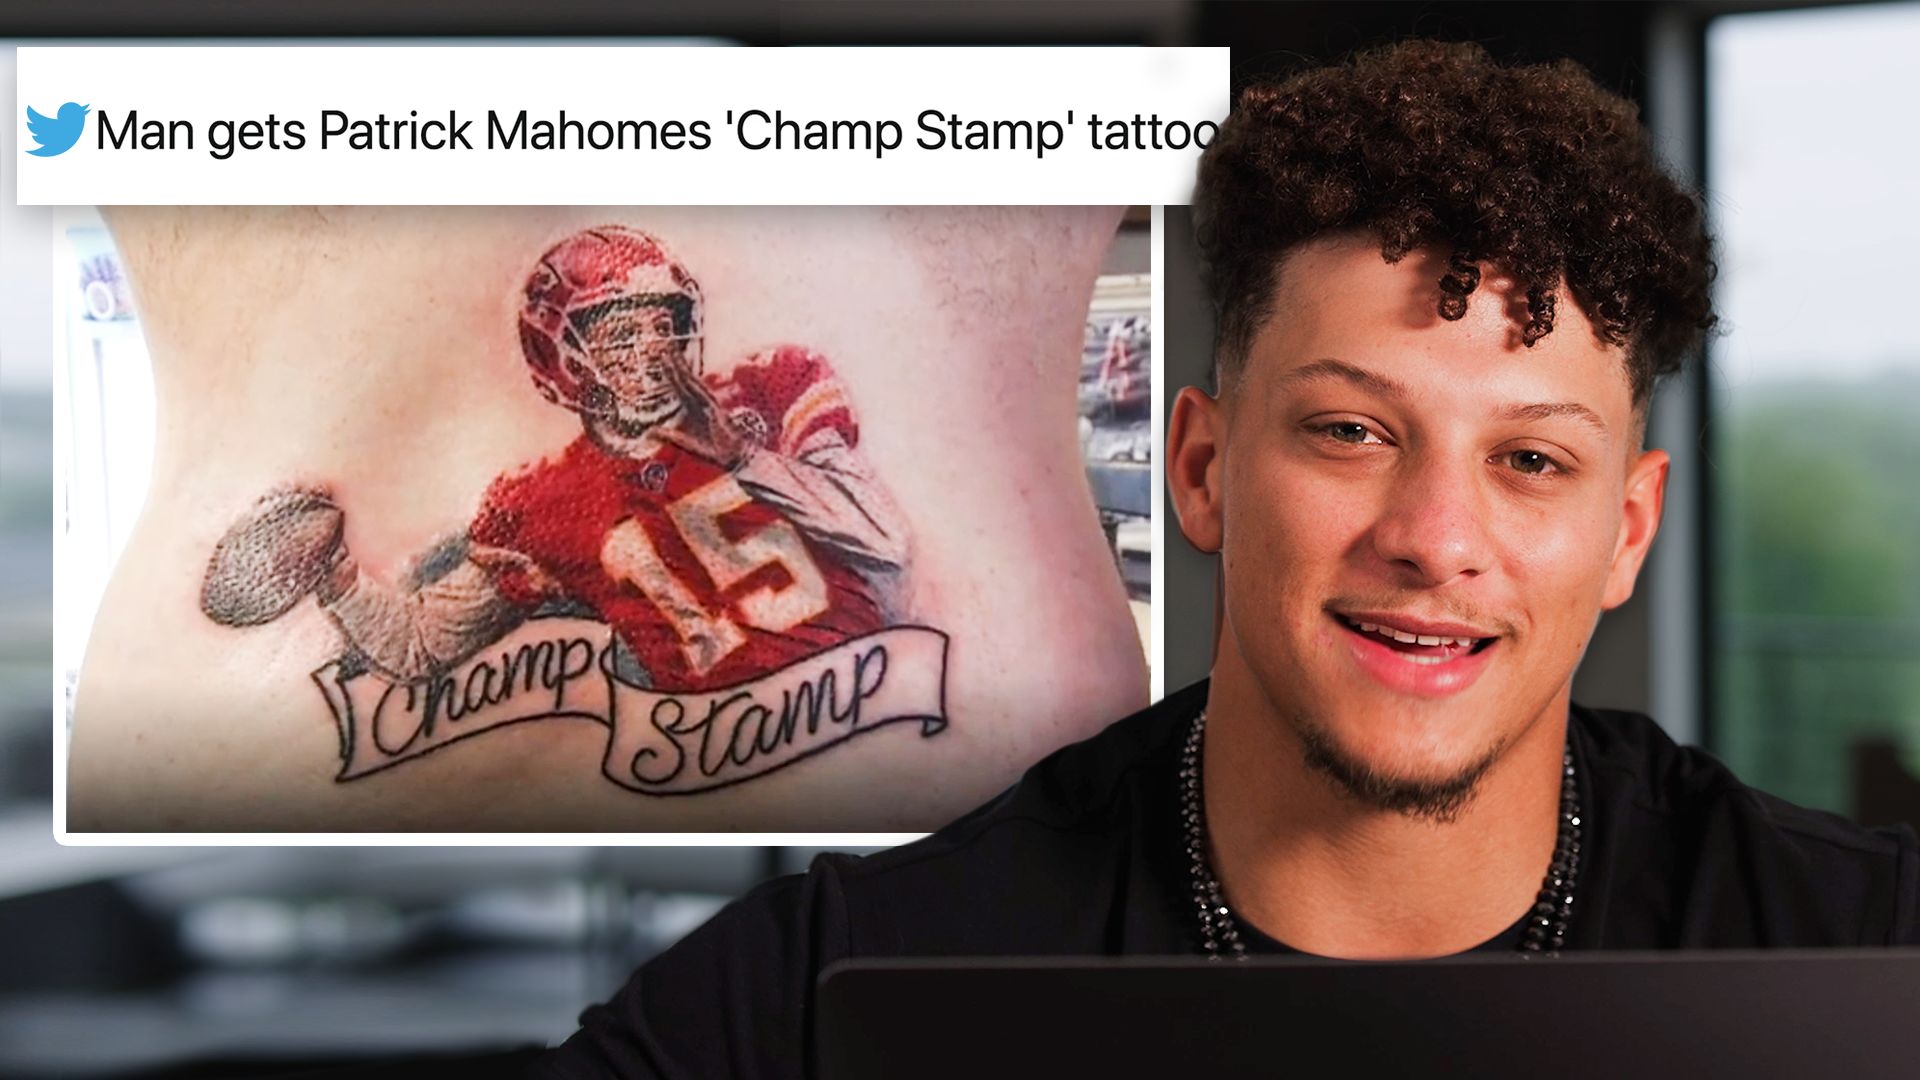 Patrick Mahomes new tattoo much different than Aaron Rodgers first